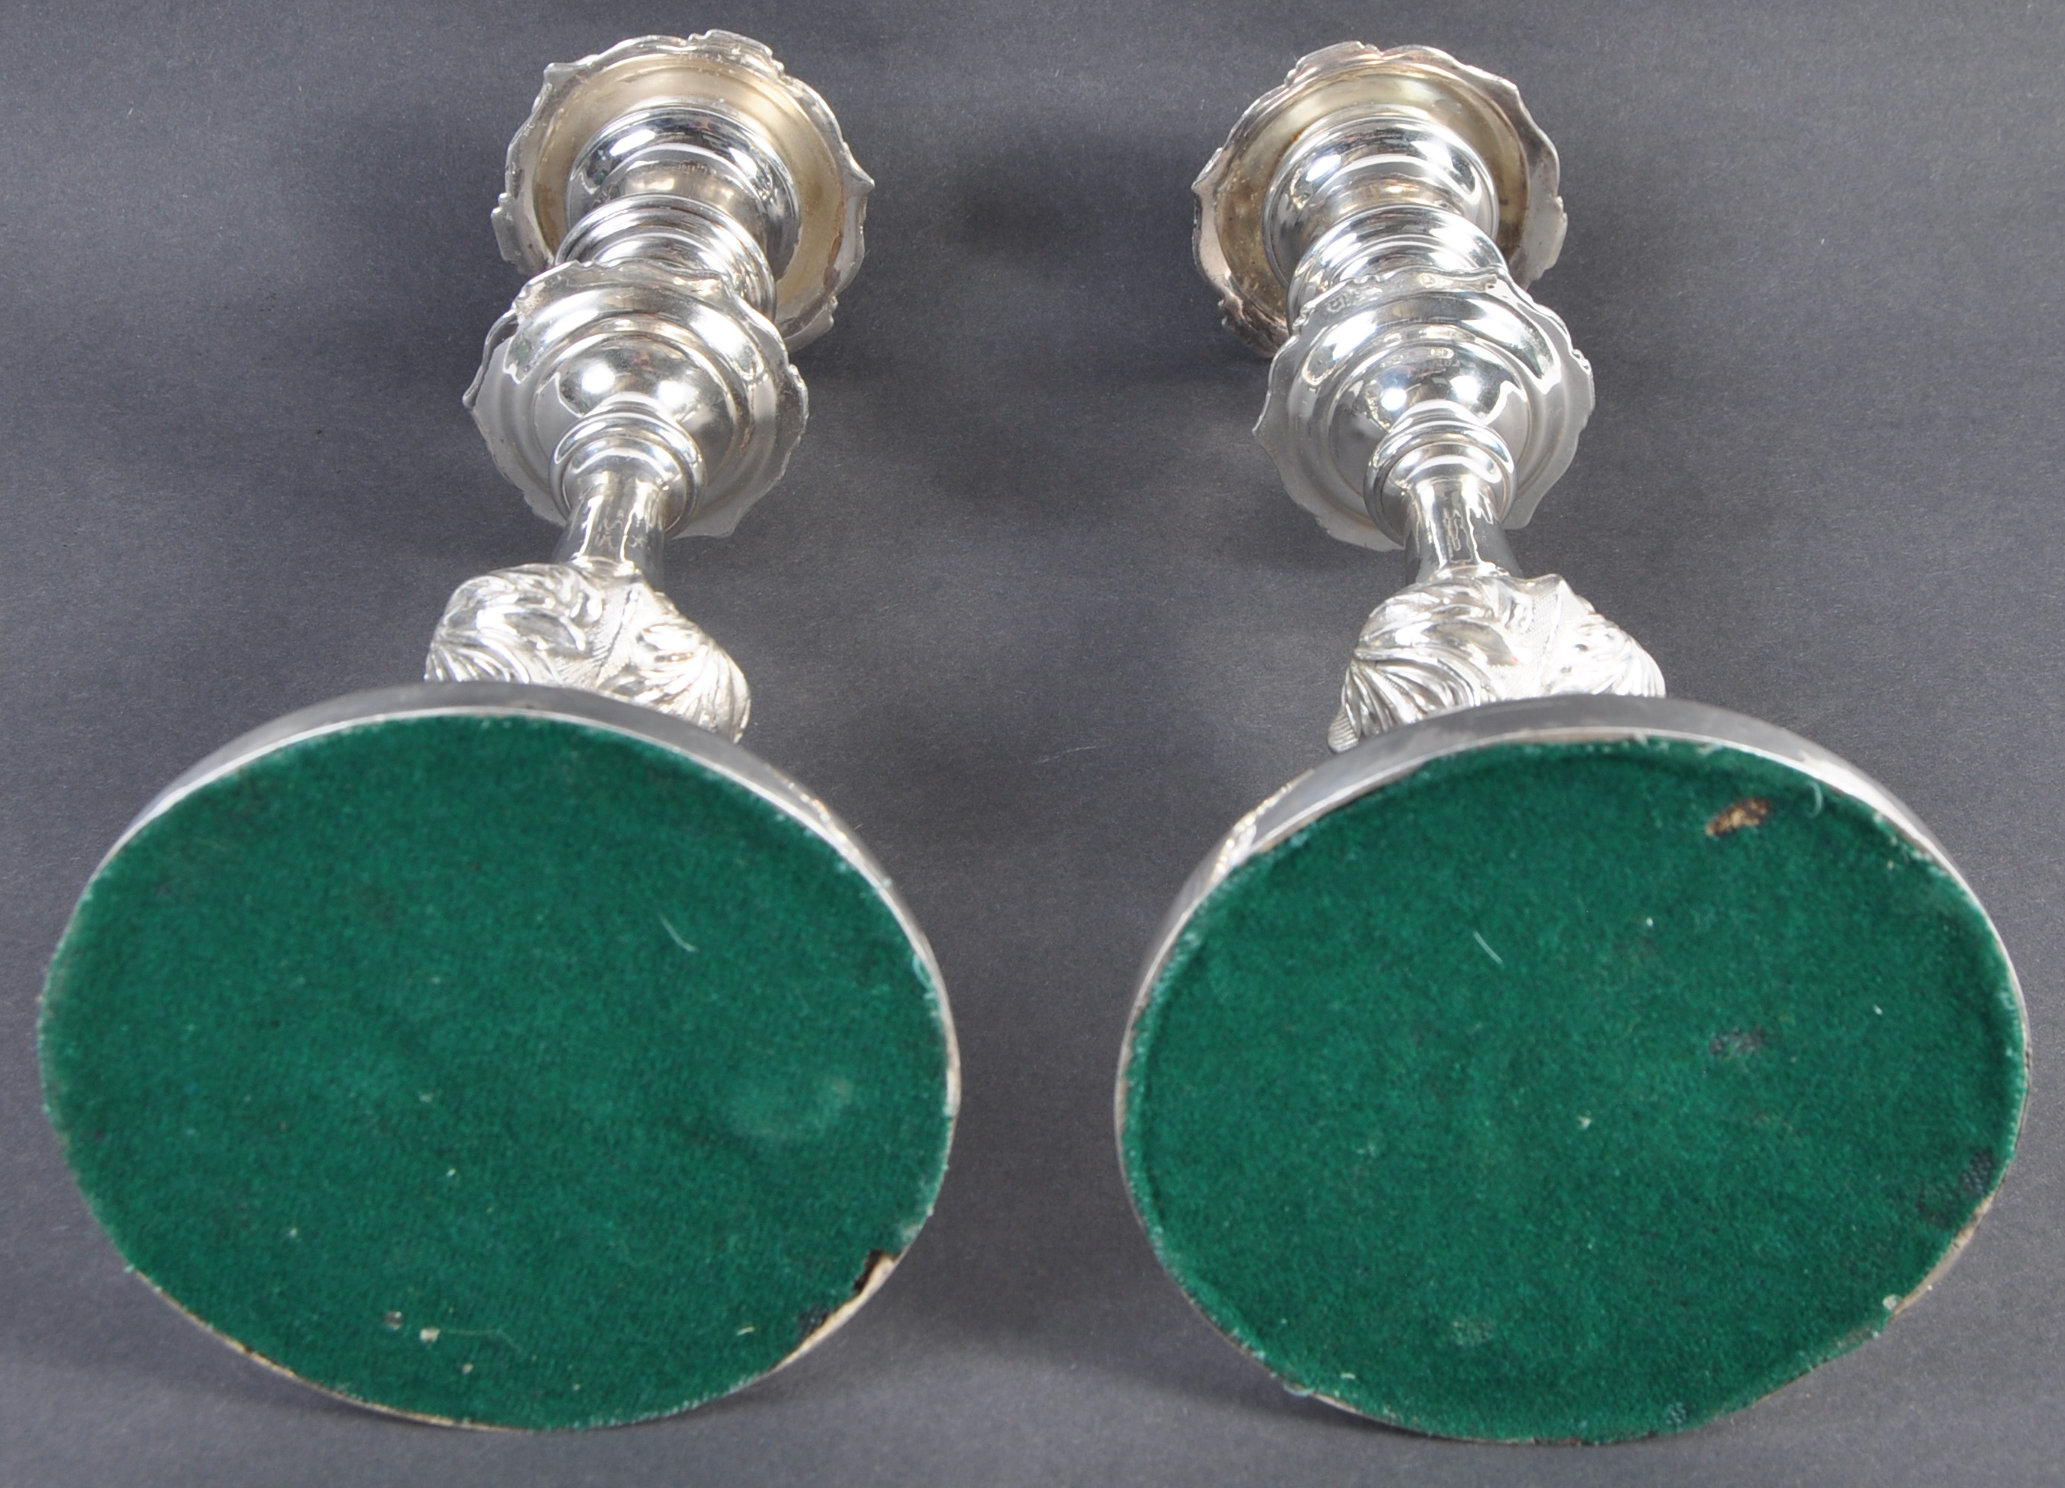 PAIR OF 19TH CENTURY SILVER WARRANTED TABLE CANDLESTICKS - Image 6 of 6